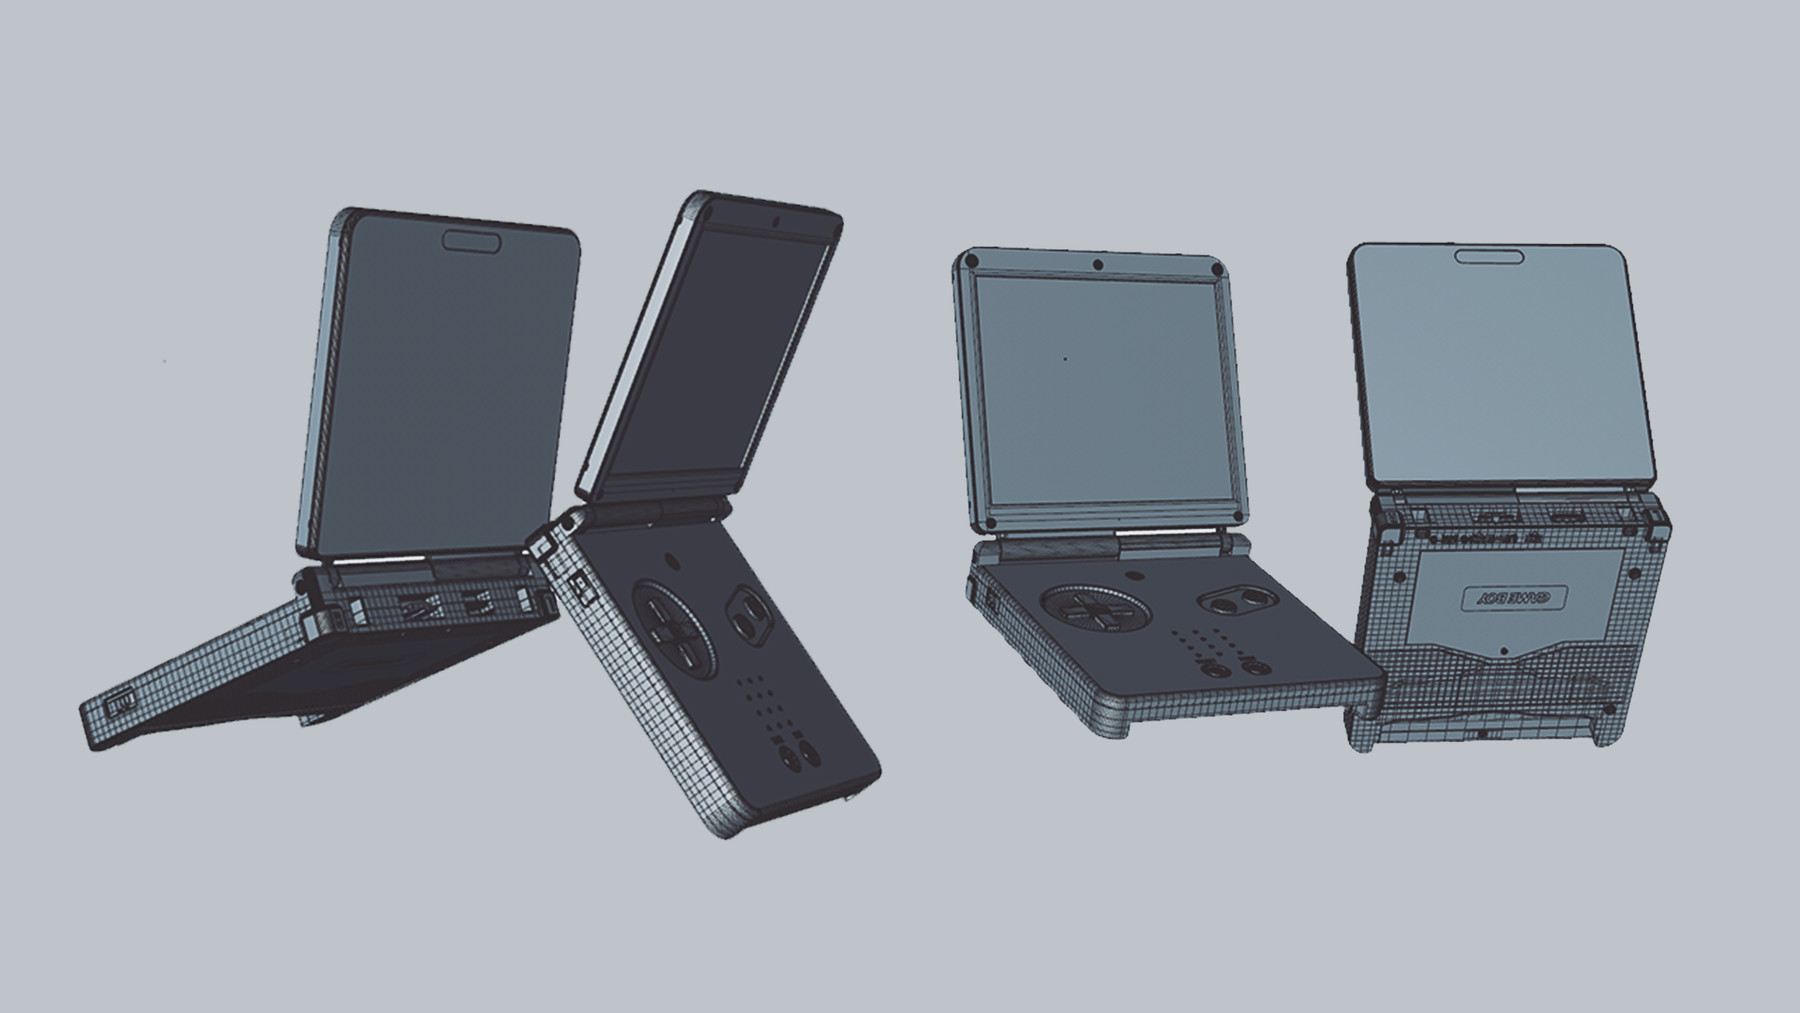 BIM Objects - Free Download! 3D Electronic Devices - Gameboy Advance SP -  ACCA software